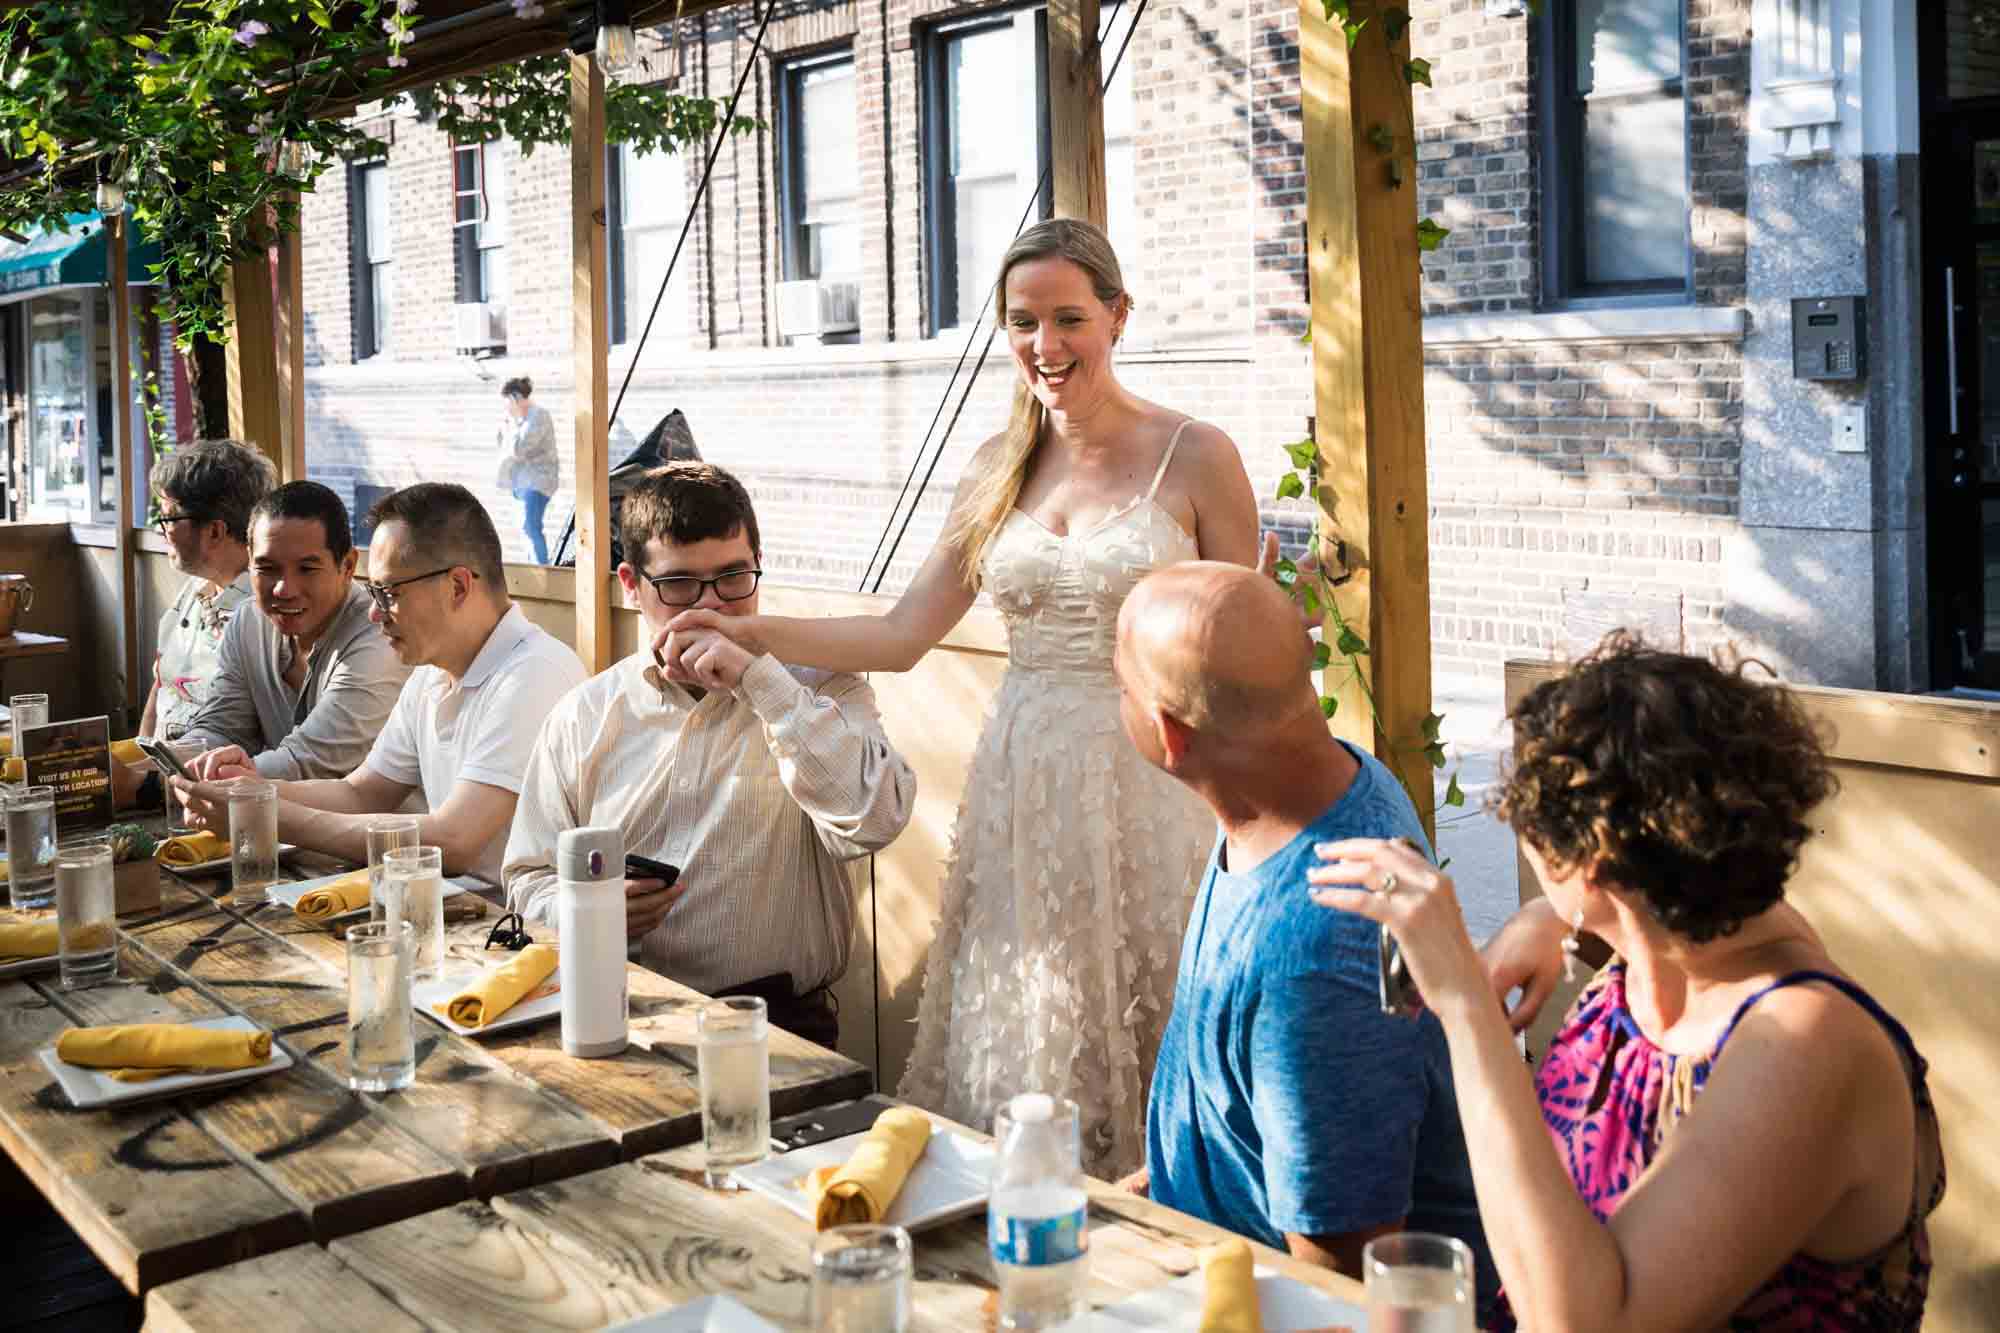 Bride talking to seated guests during rehearsal dinner at an outdoor restaurant